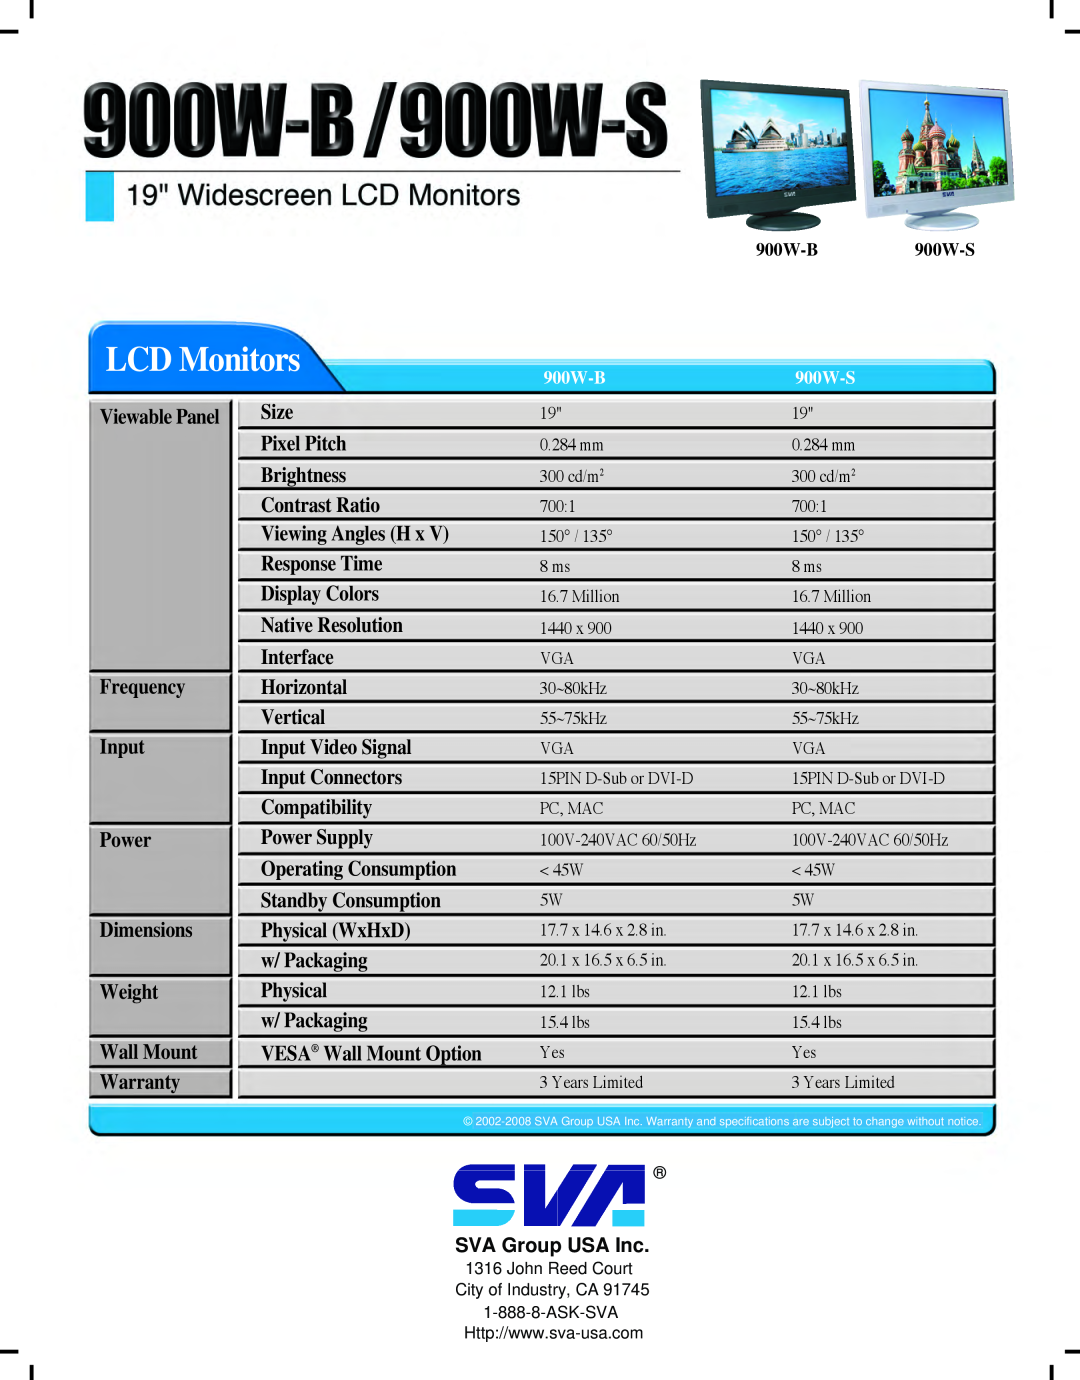 SVA 900W-B LCD Monitors, Viewable Panel Frequency Input Power Dimensions Weight, Size Pixel Pitch, Wall Mount Warranty 